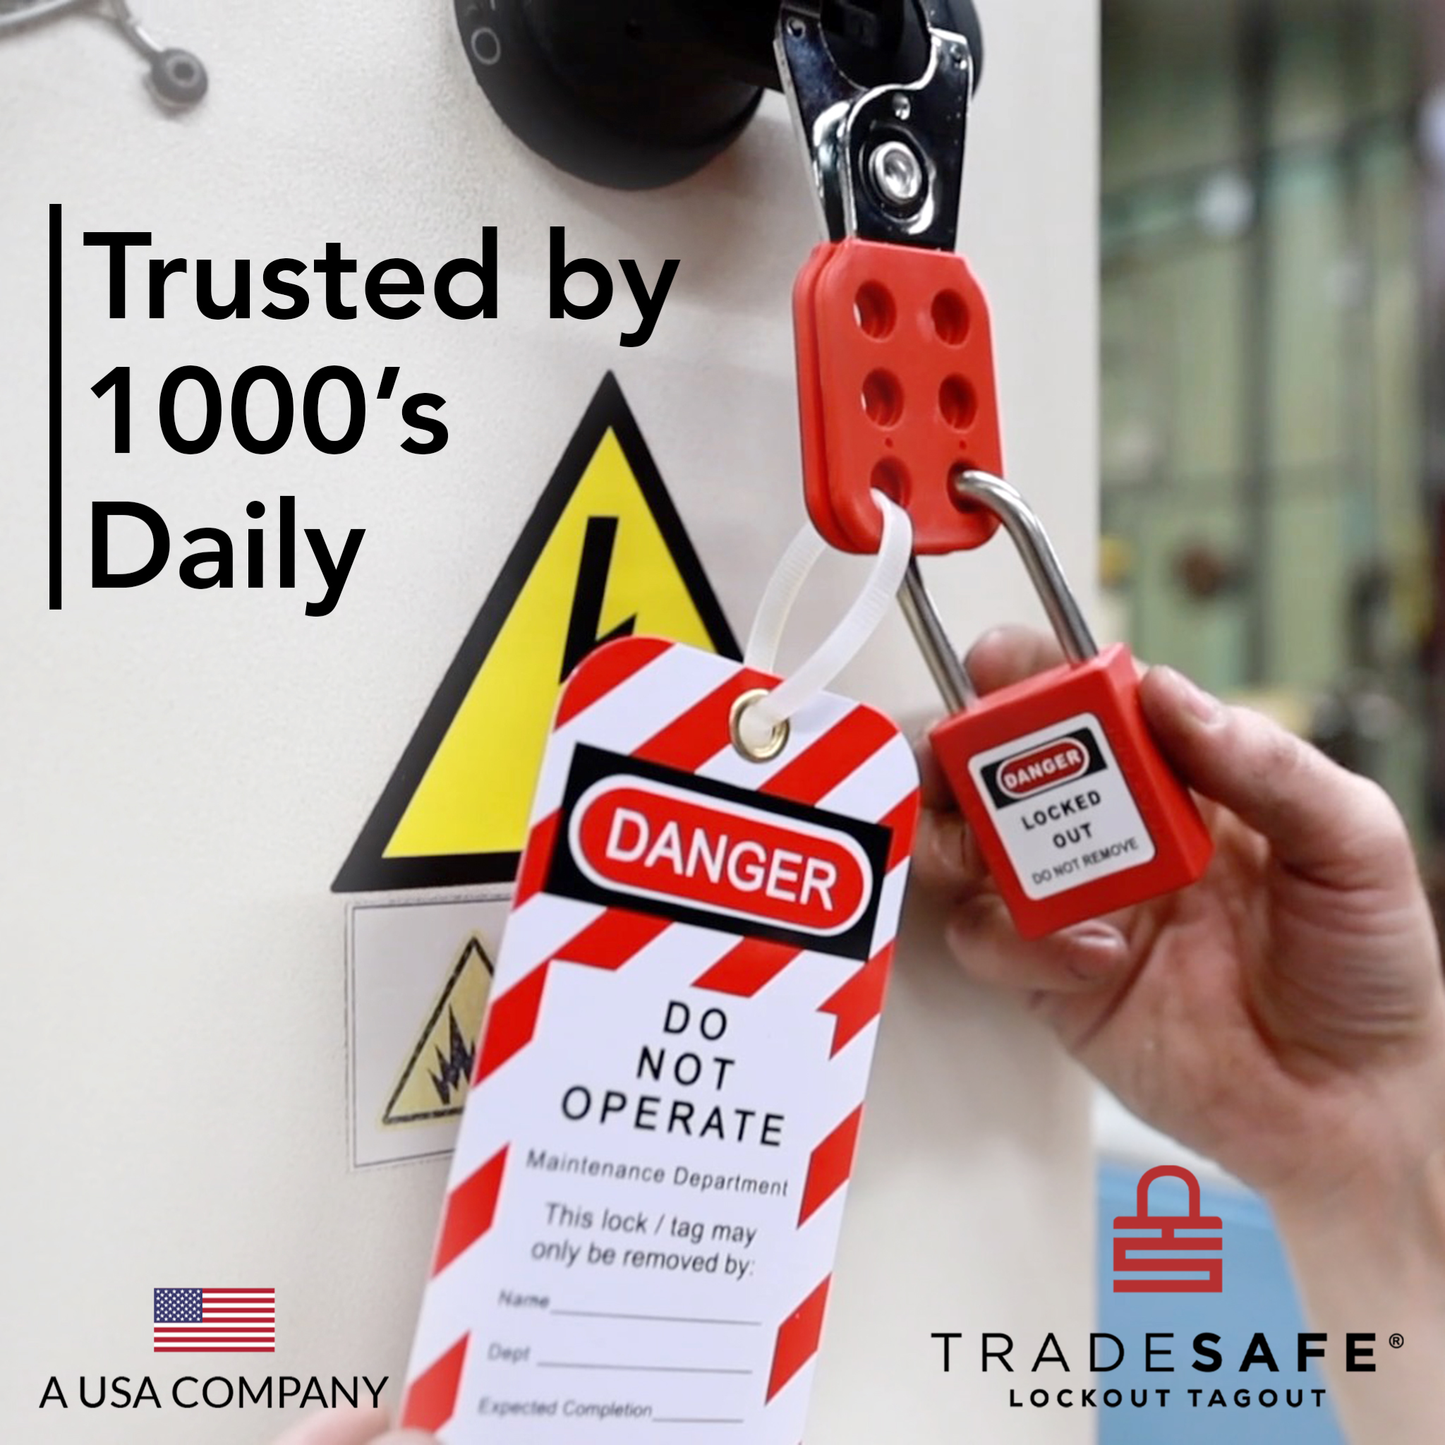 tradesafe lockout tagout trusted by 1000's daily